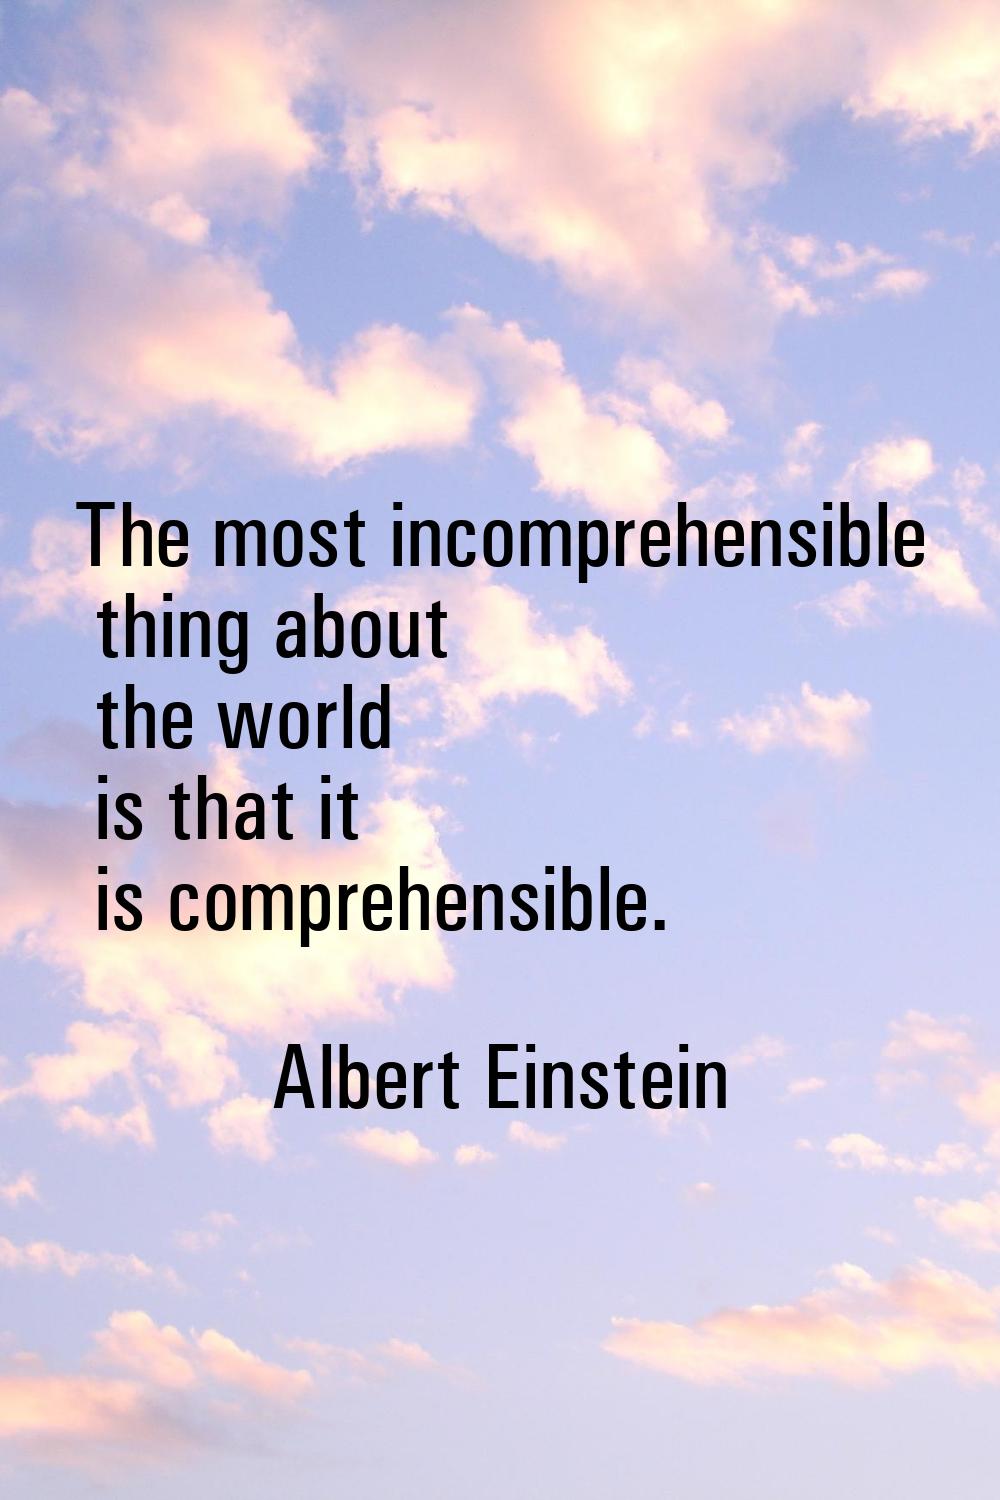 The most incomprehensible thing about the world is that it is comprehensible.